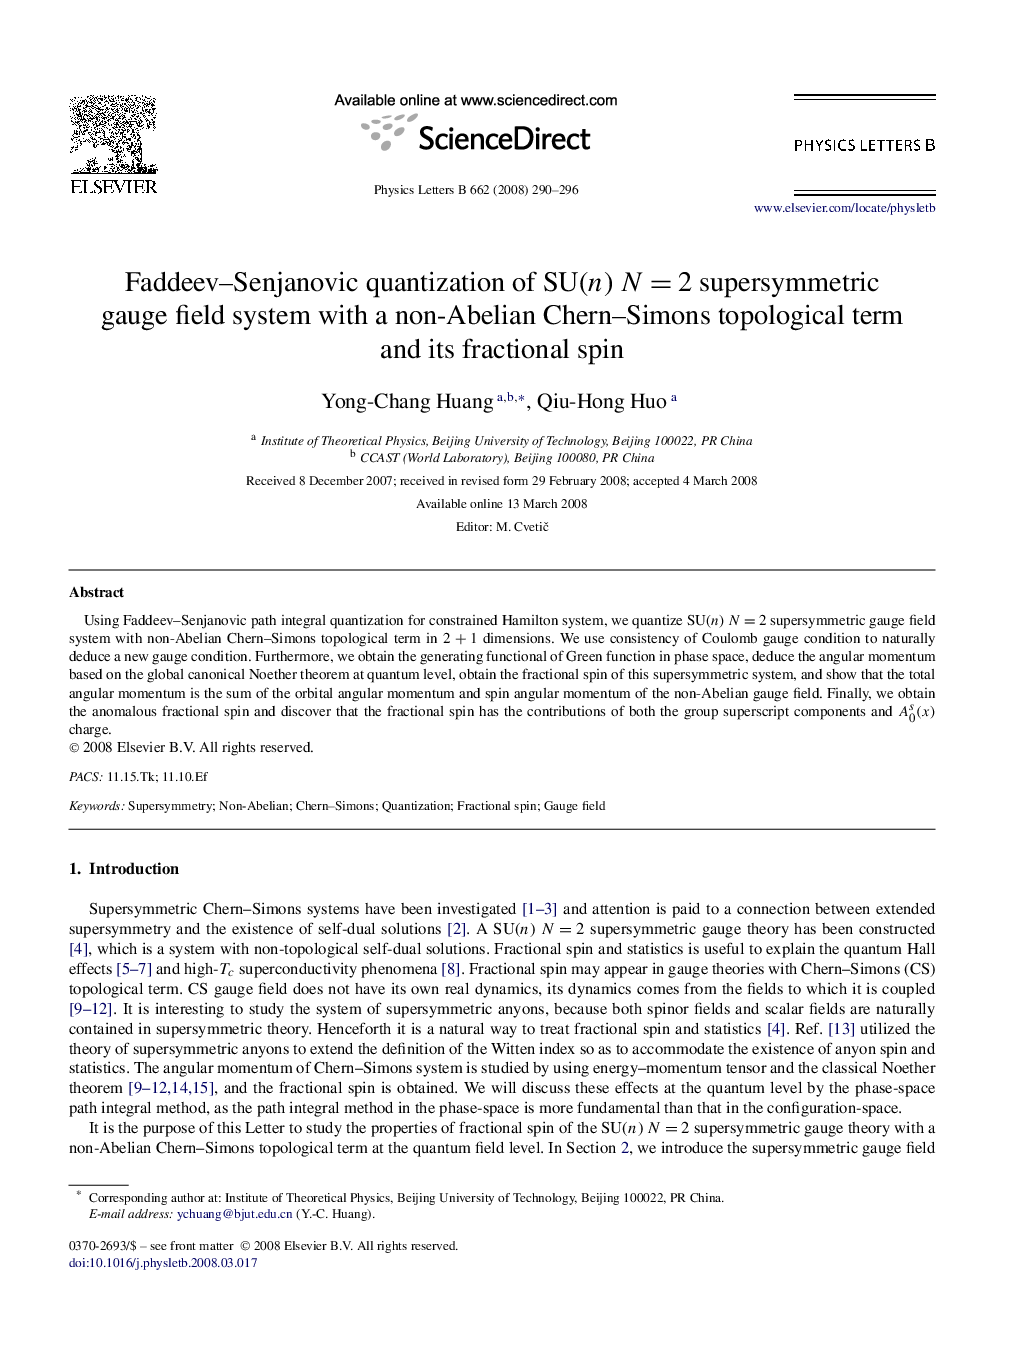 Faddeev-Senjanovic quantization of SU(n) N=2 supersymmetric gauge field system with a non-Abelian Chern-Simons topological term and its fractional spin